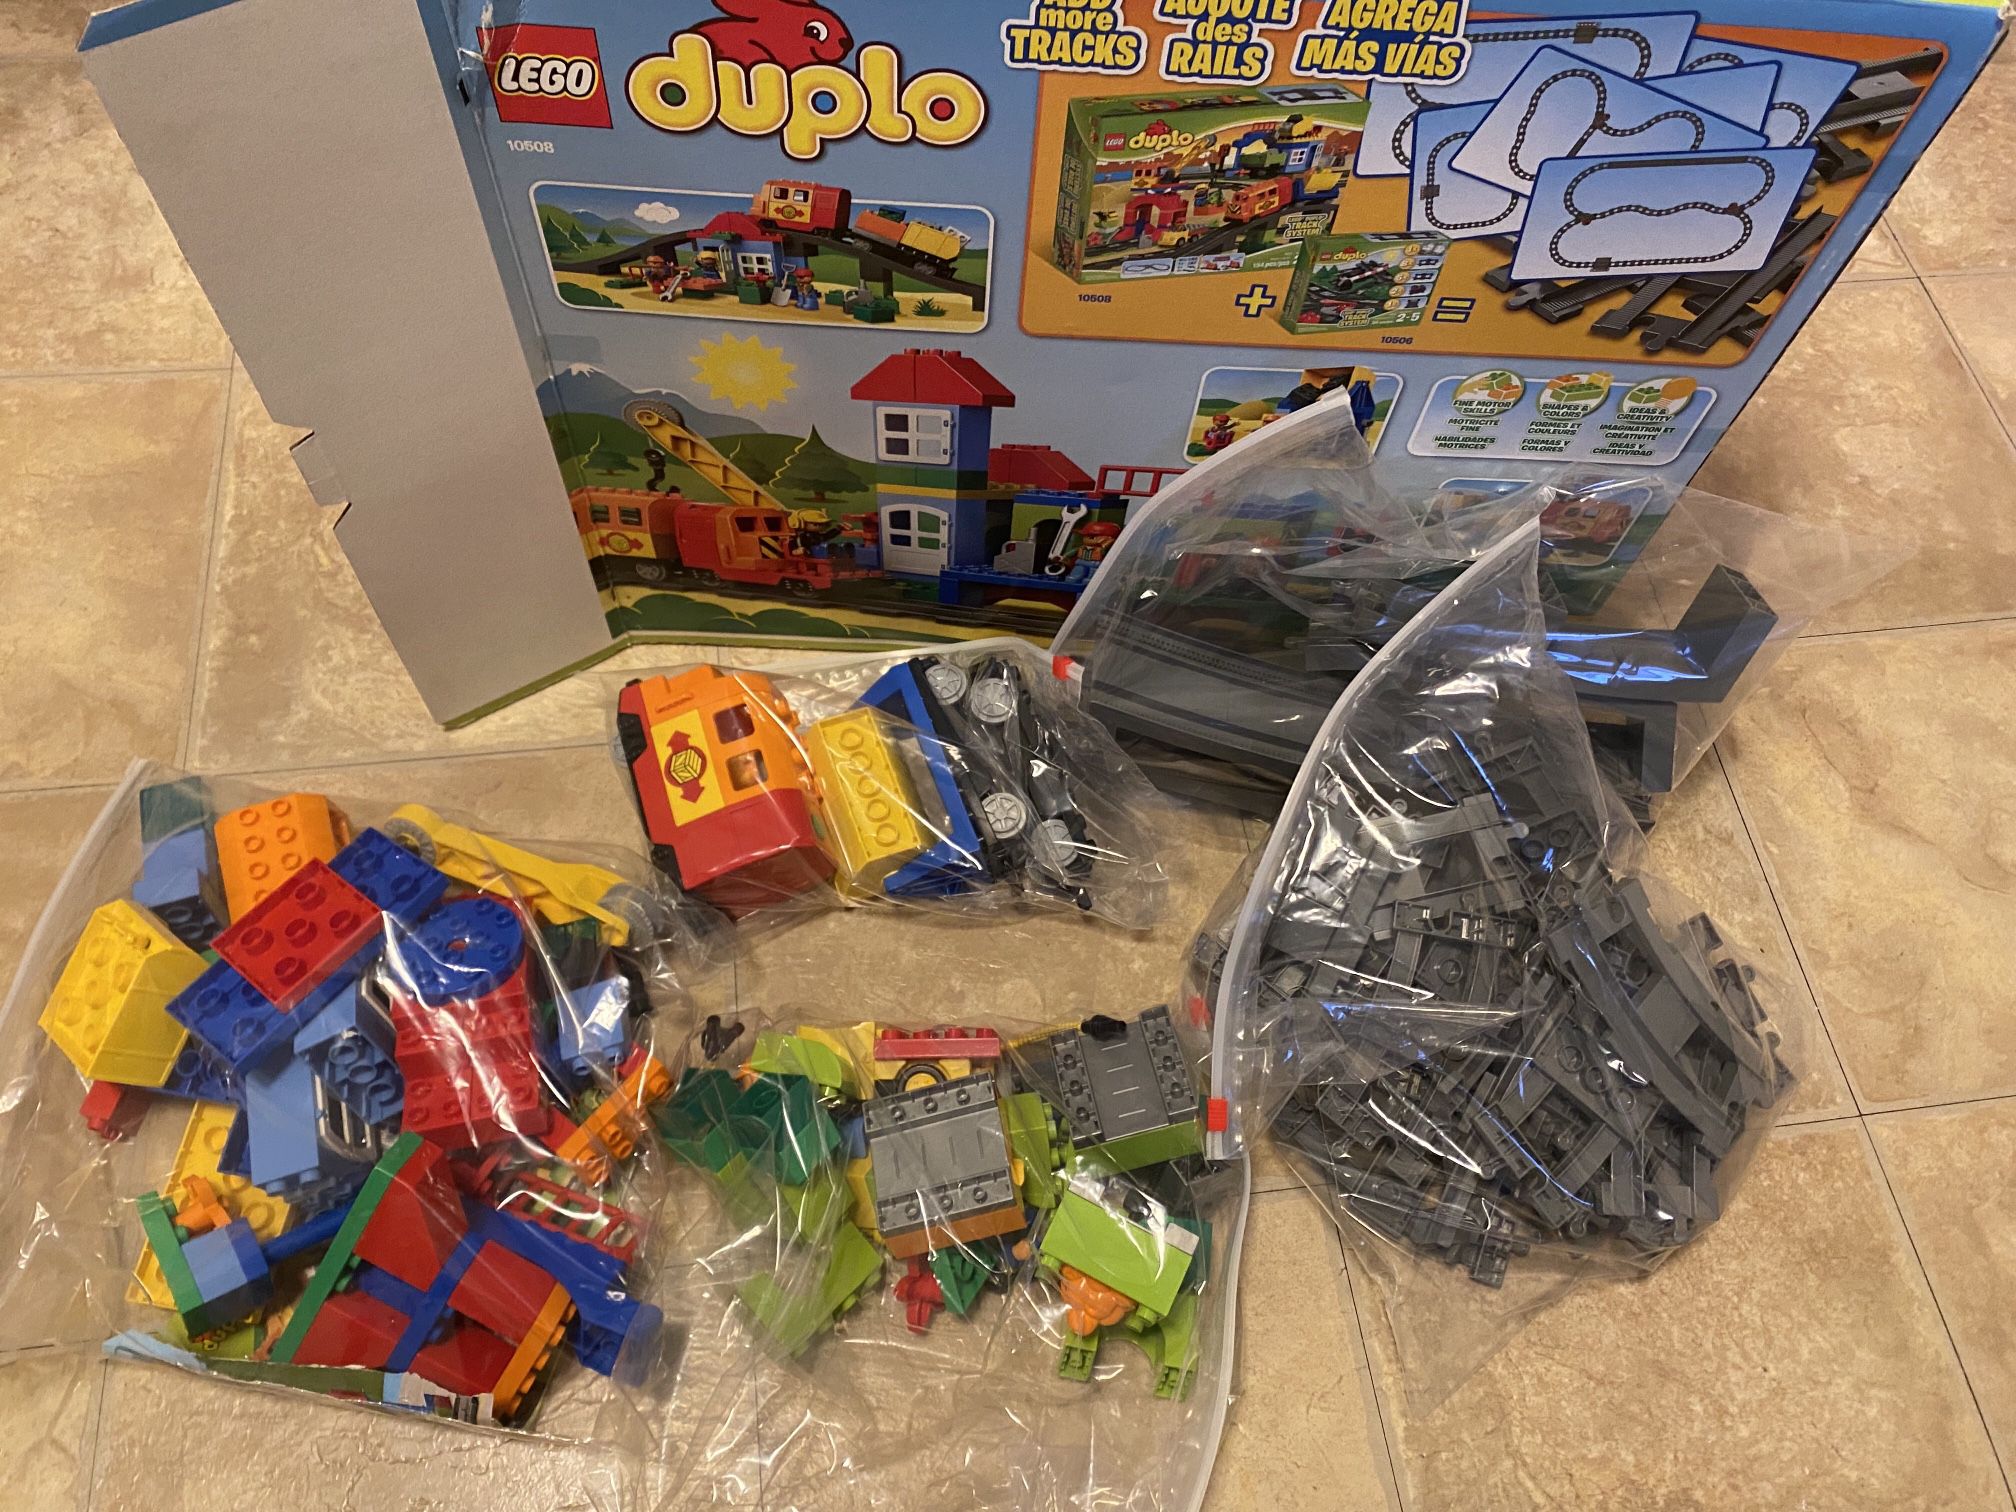 LEGO Duplo Deluxe Train #10508 Retired Set for Sale in IL - OfferUp